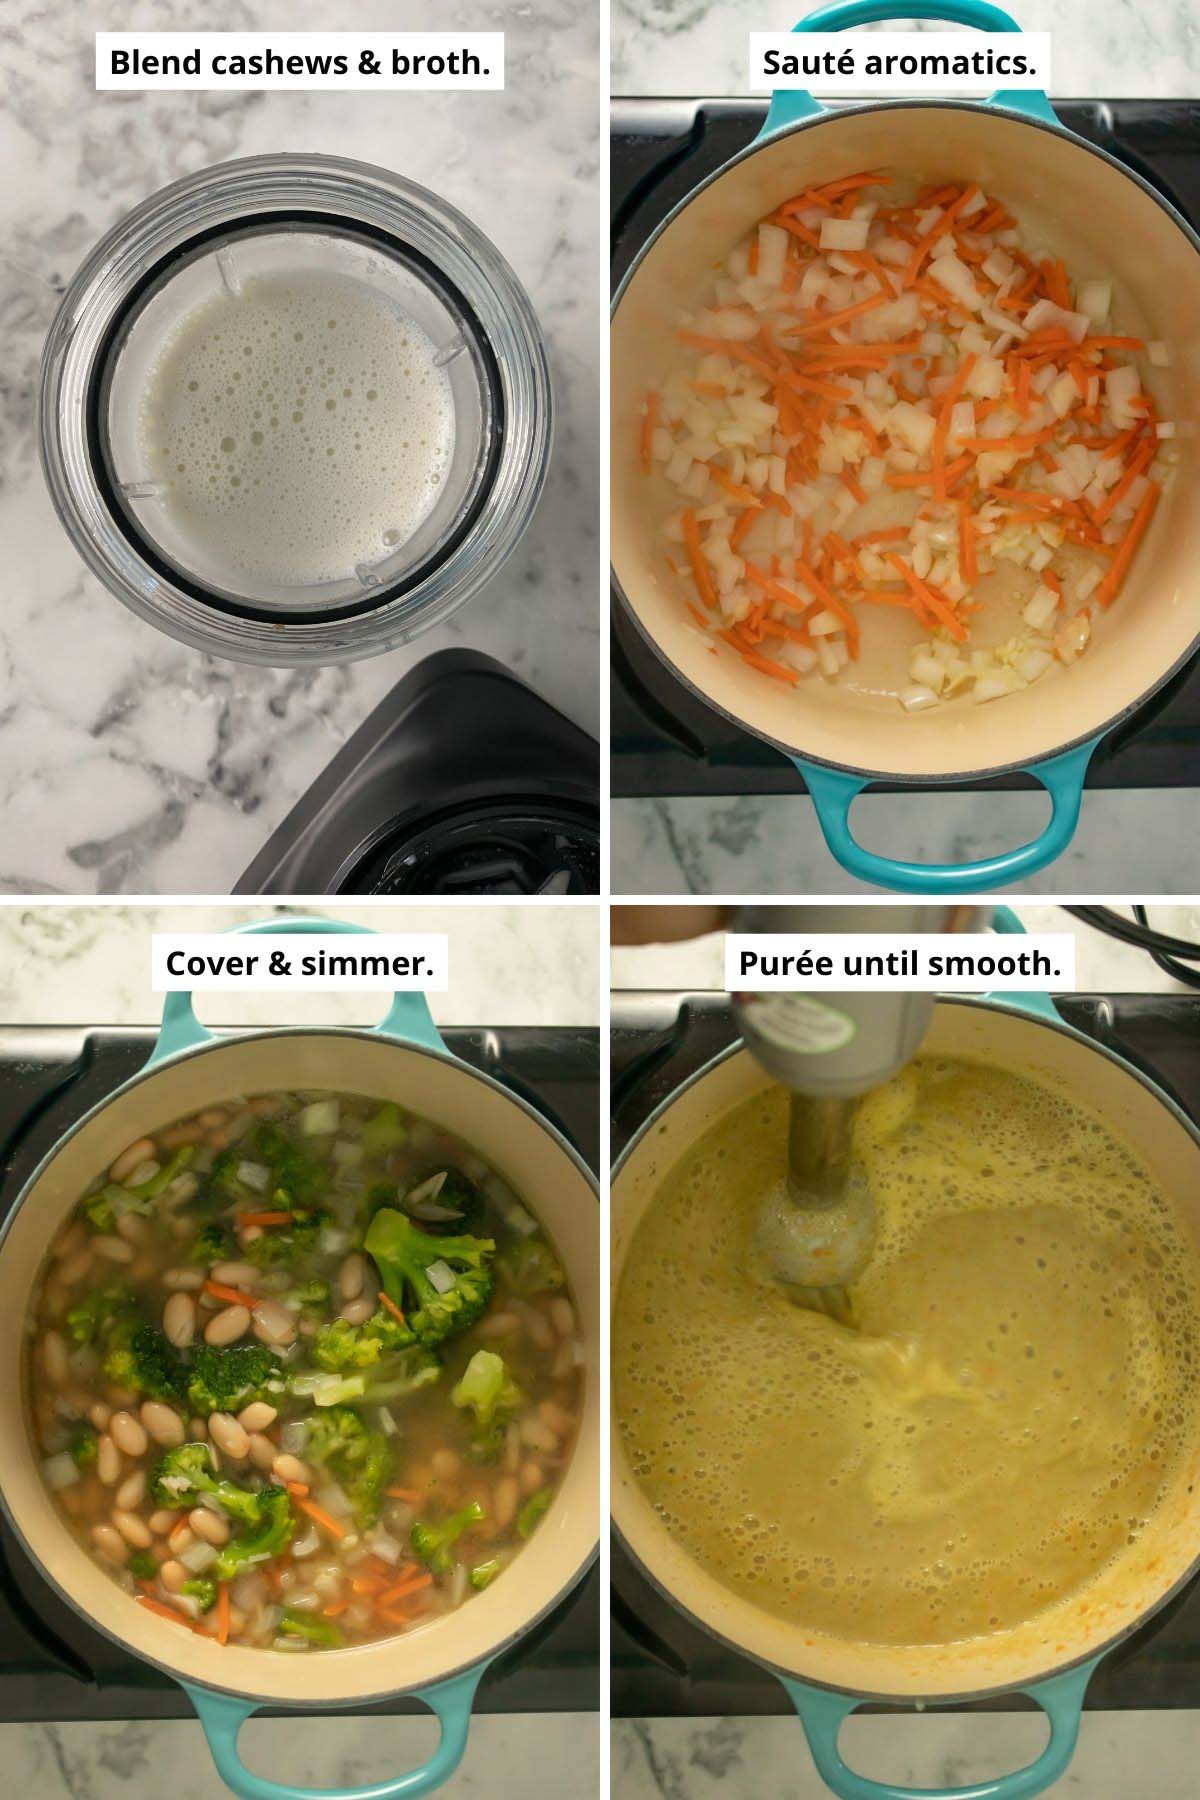 image collage showing the cashew cream, the sautéed veggies, veggies and beans in the pot, pureeing the soup